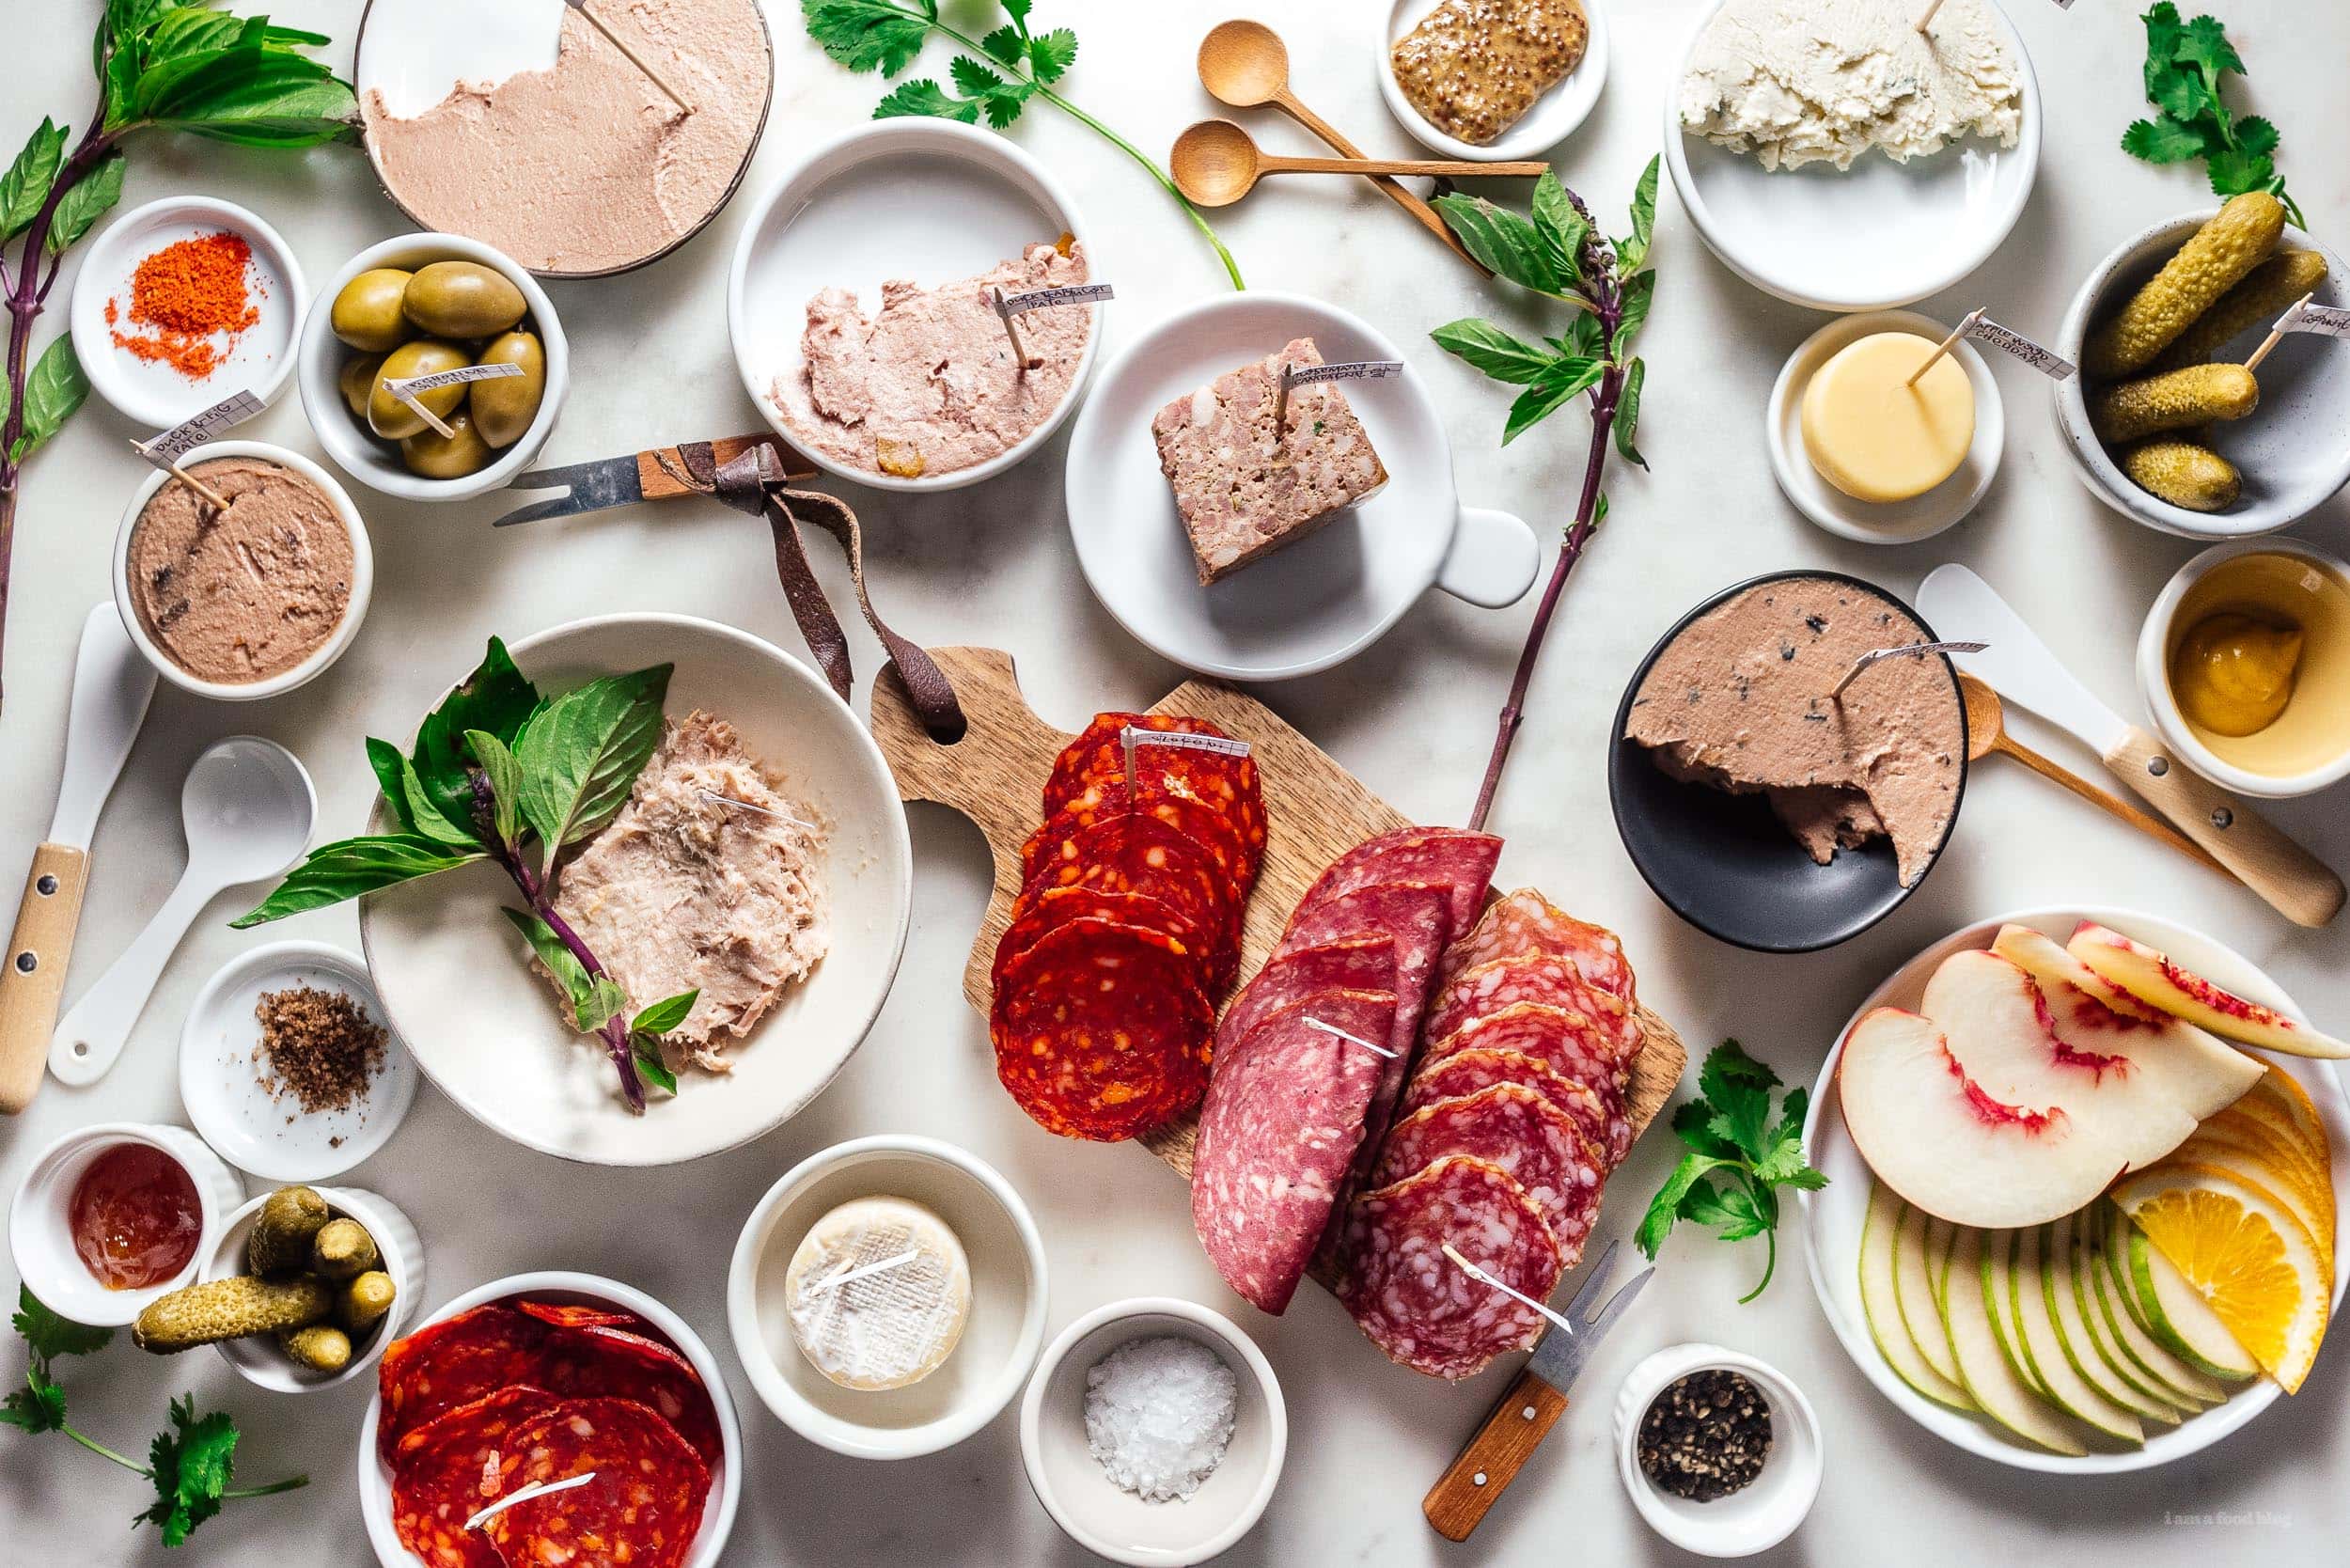 How to Make the Ultimate Charcuterie Board